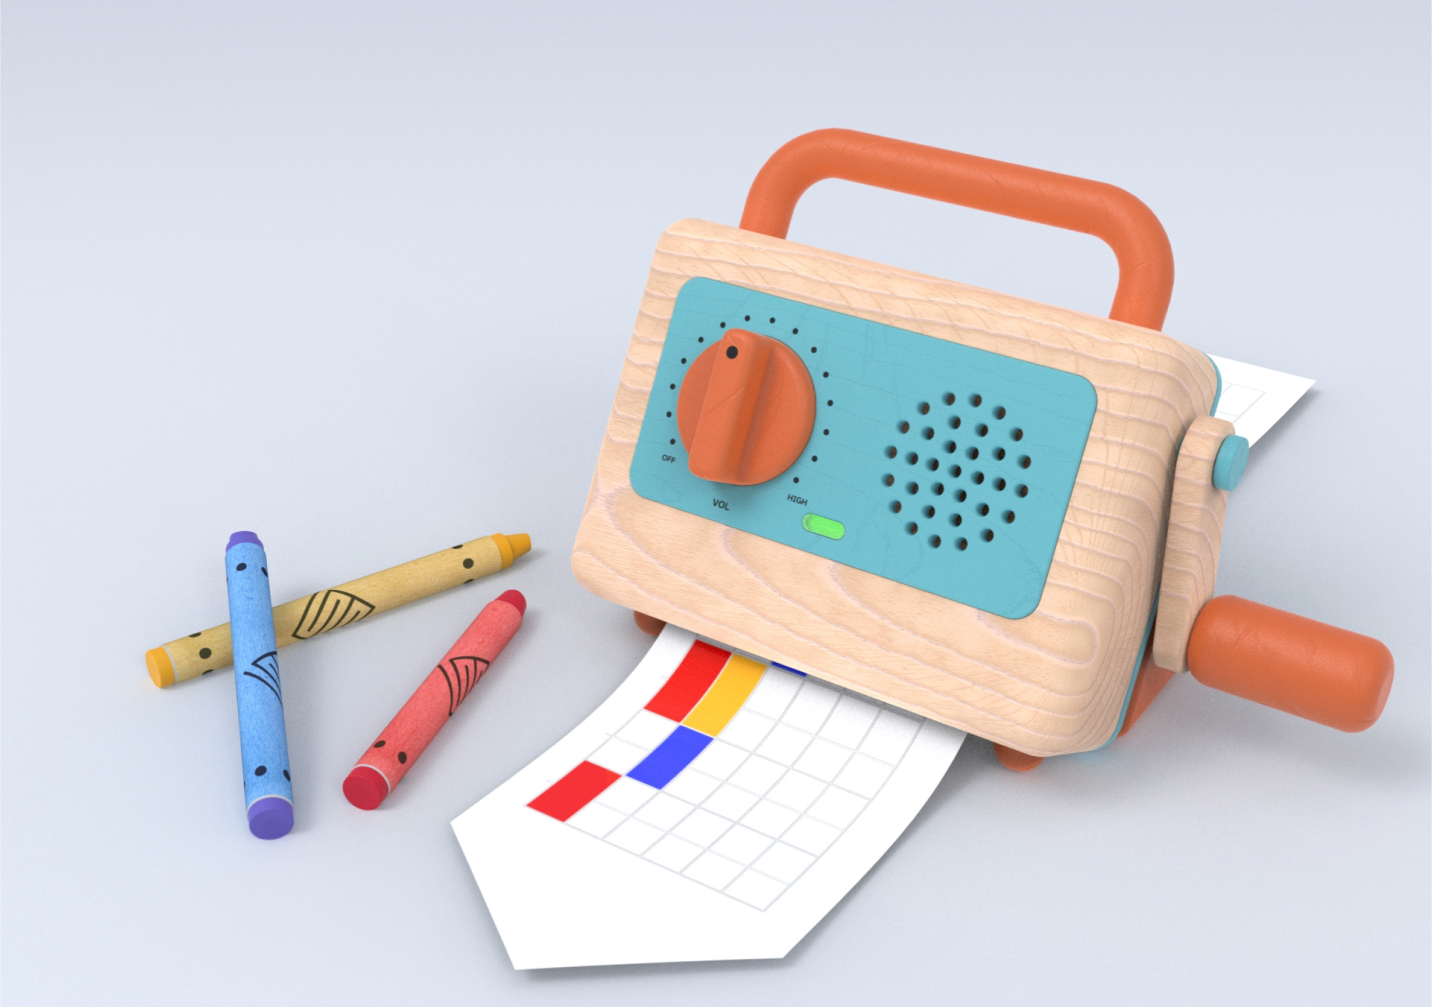 music box toy that uses crayon drawings as input